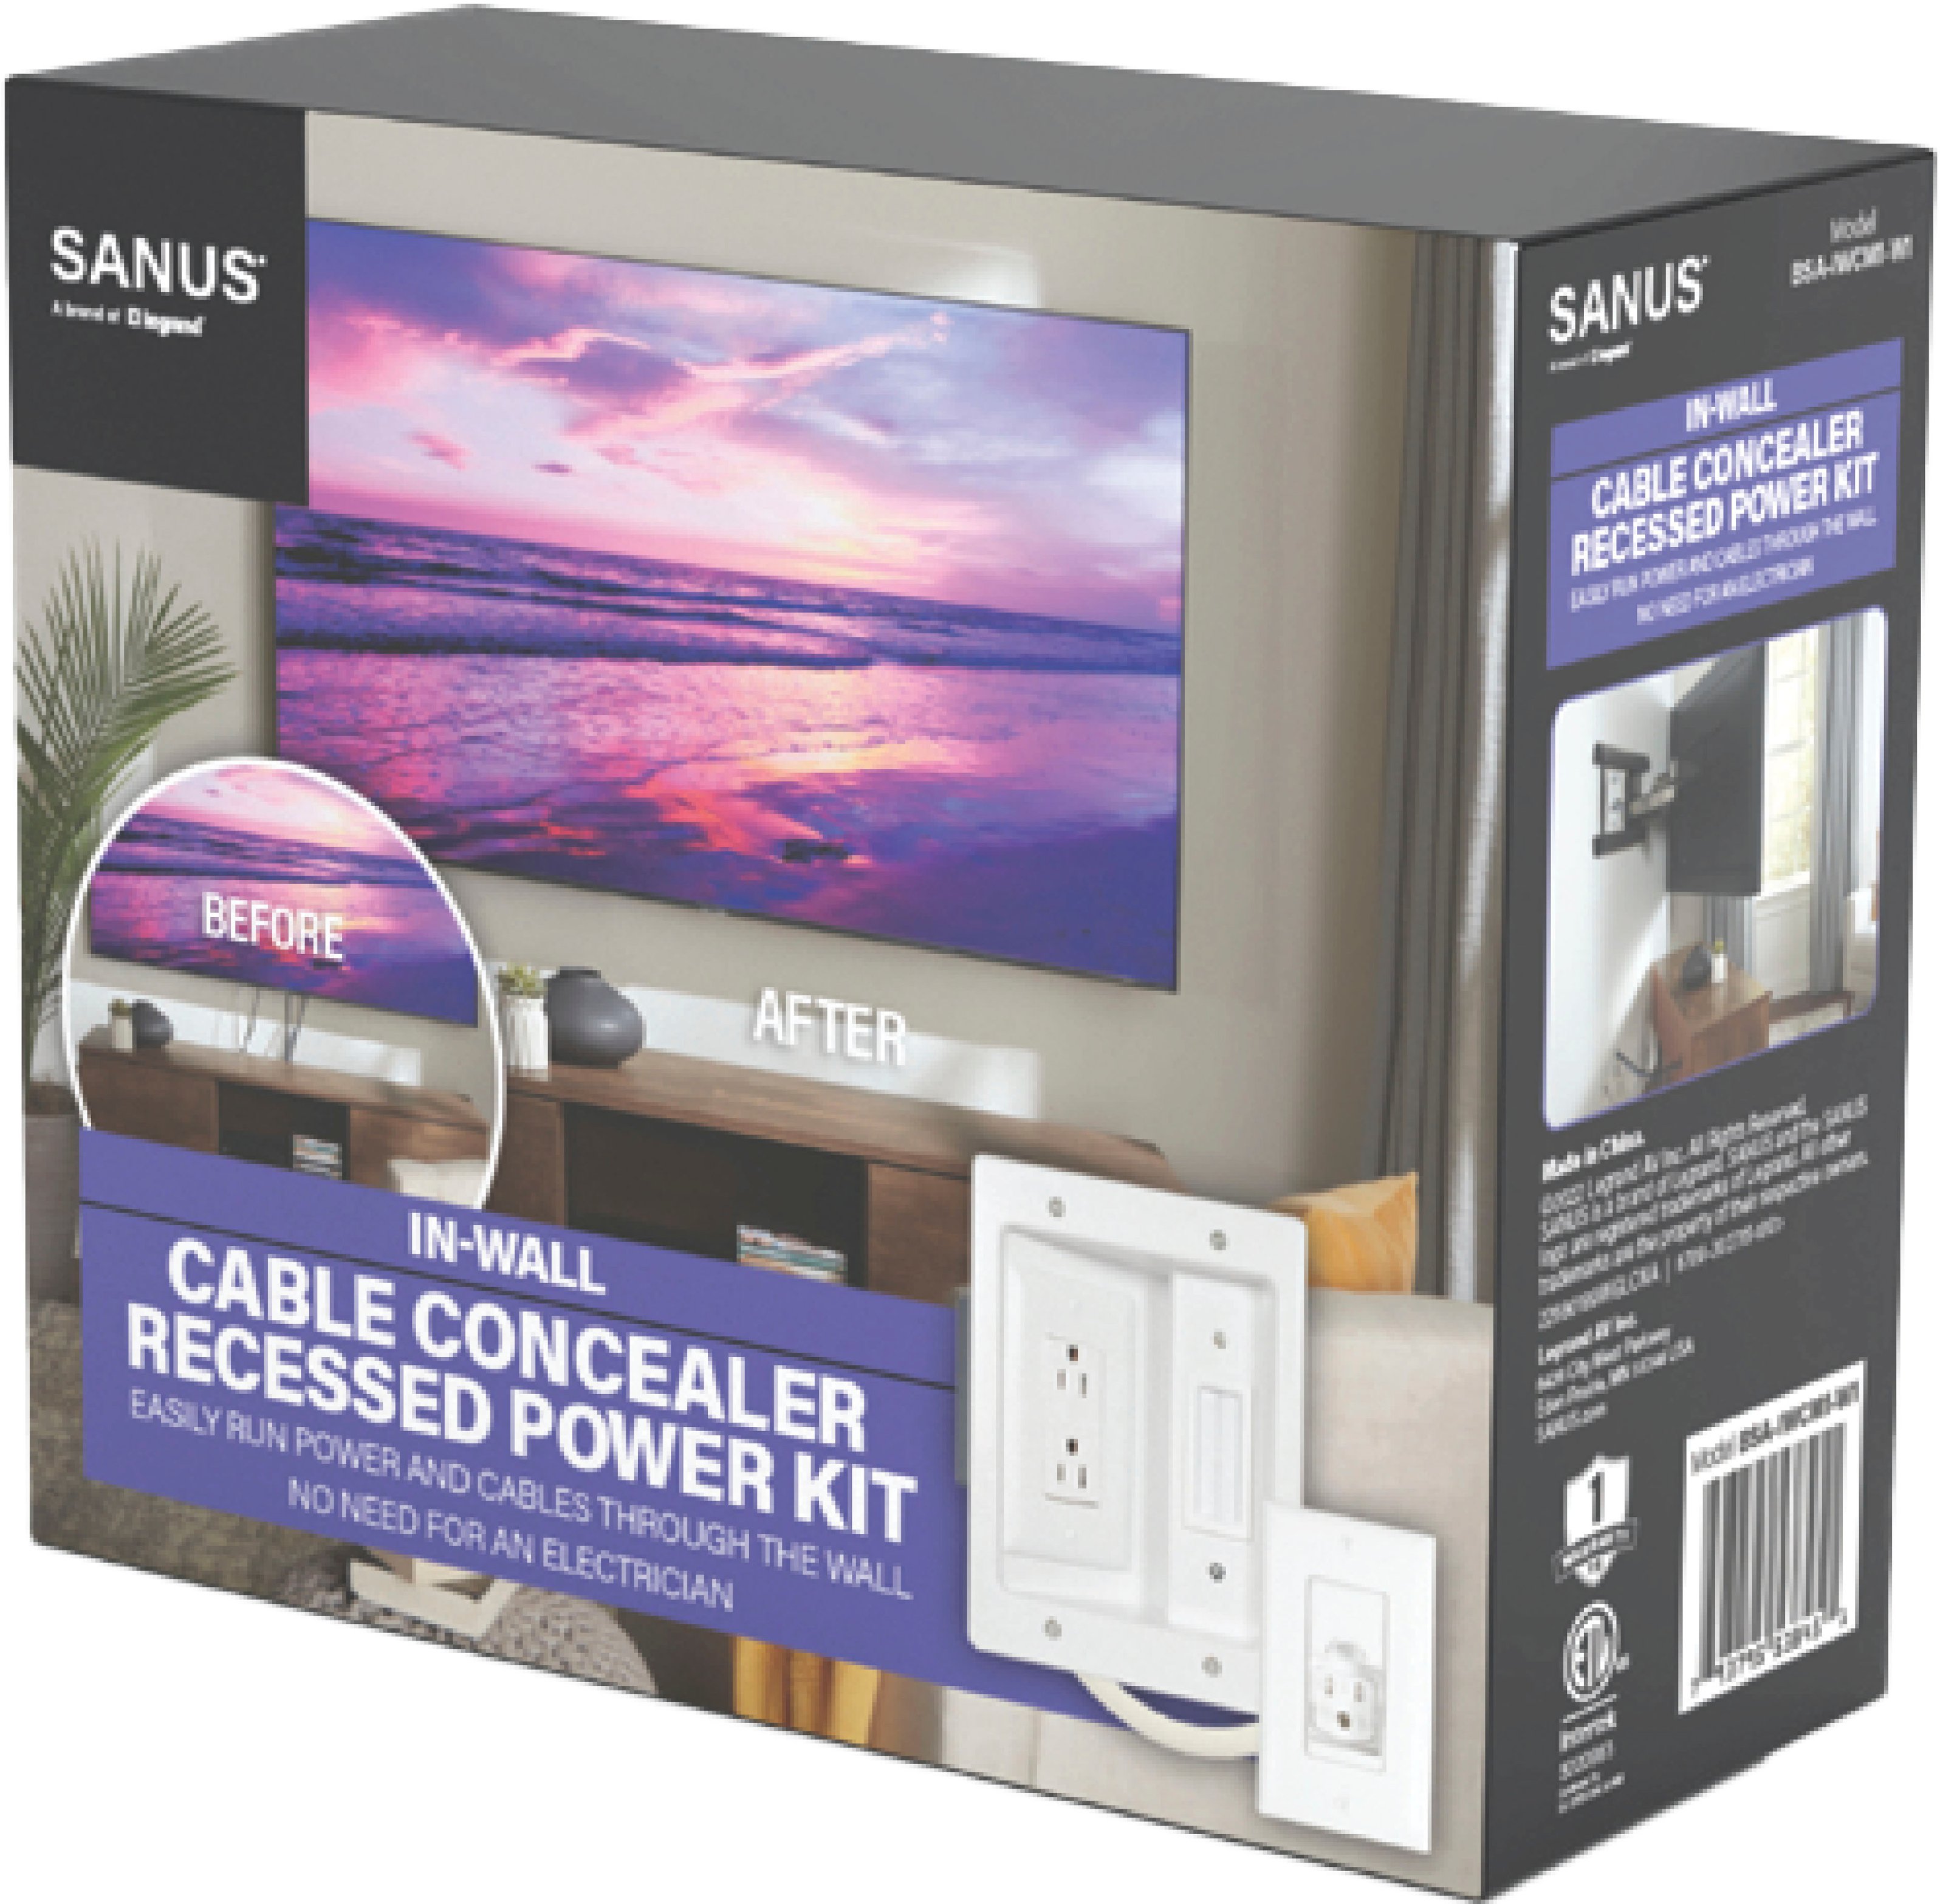 Sanus - In-Wall Cable Concealer Recessed Power Kit for Mounted TVs